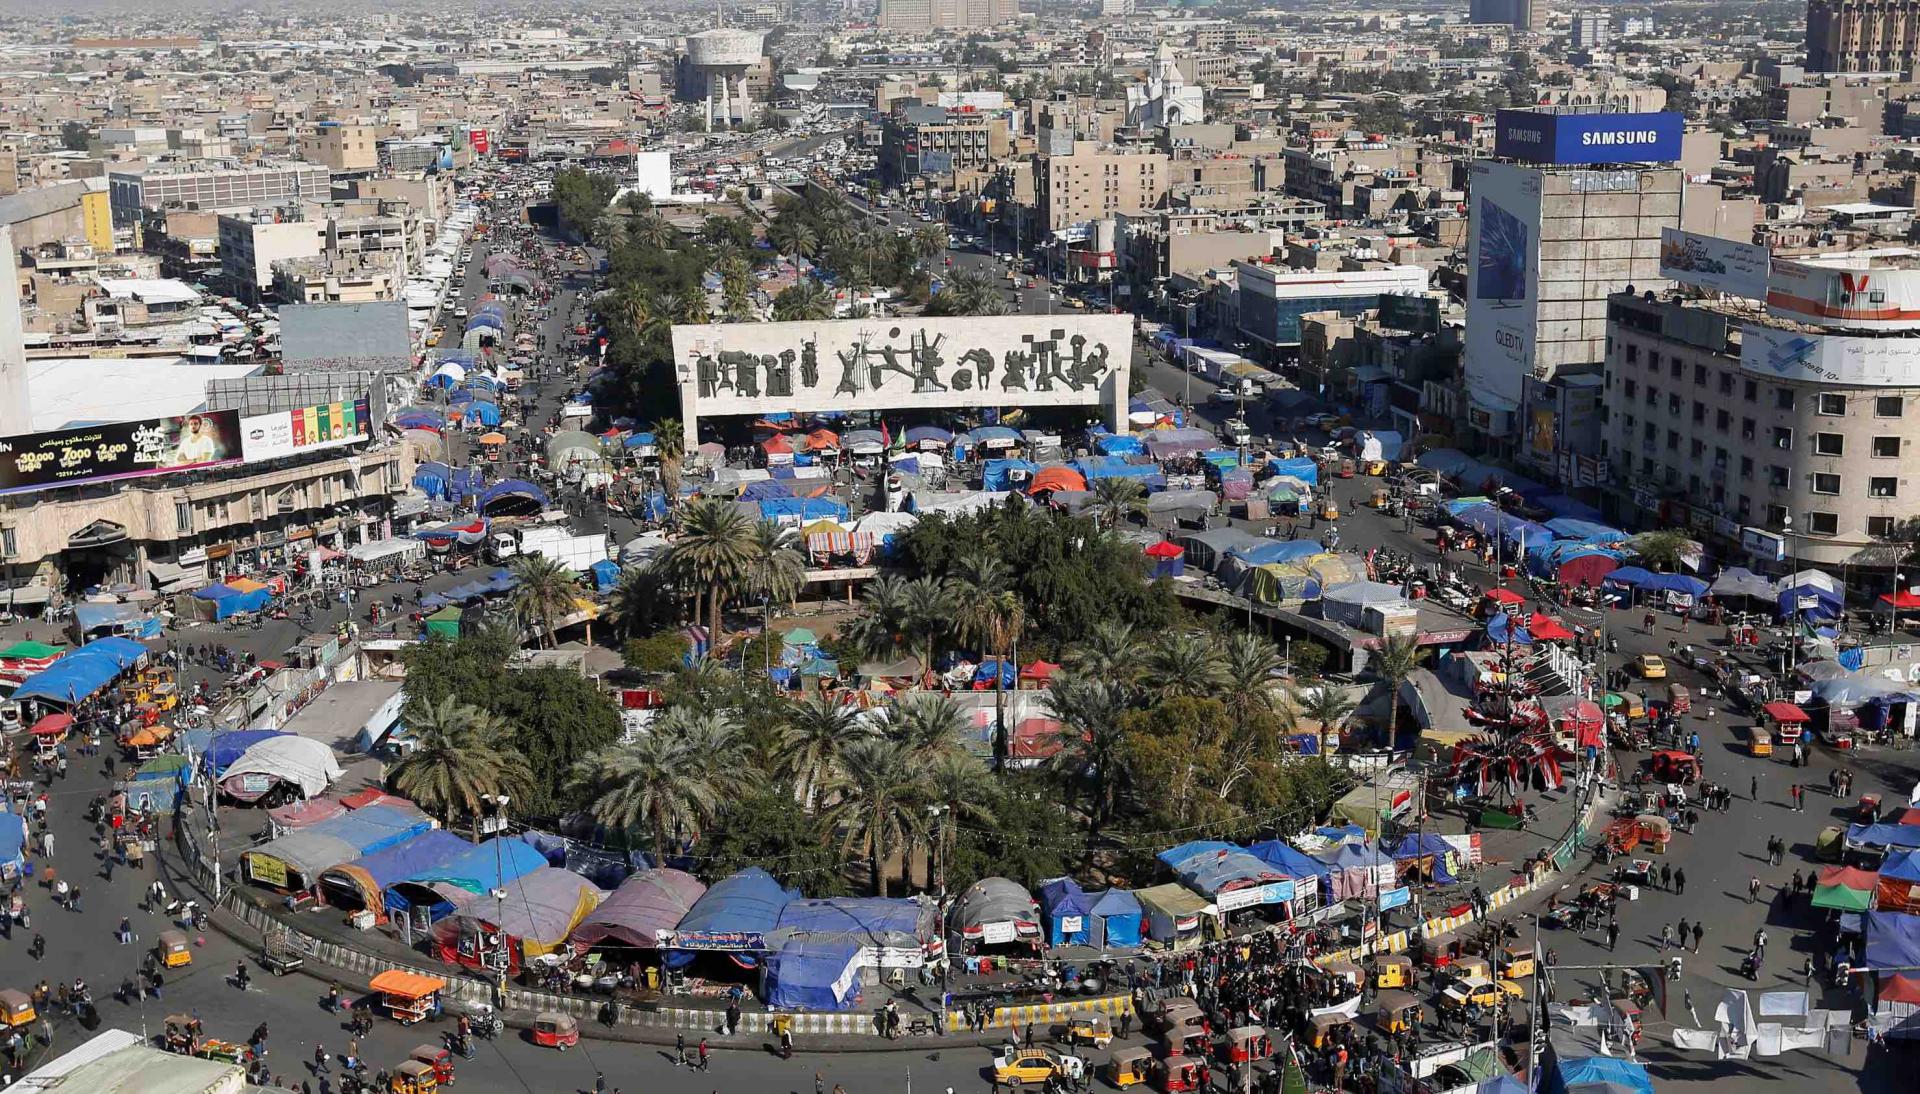 Demonstrators opposed to Allawi's nomination began clustering their tents closer together in Baghdad's Tahrir Square, away from those occupied by Sadrists.